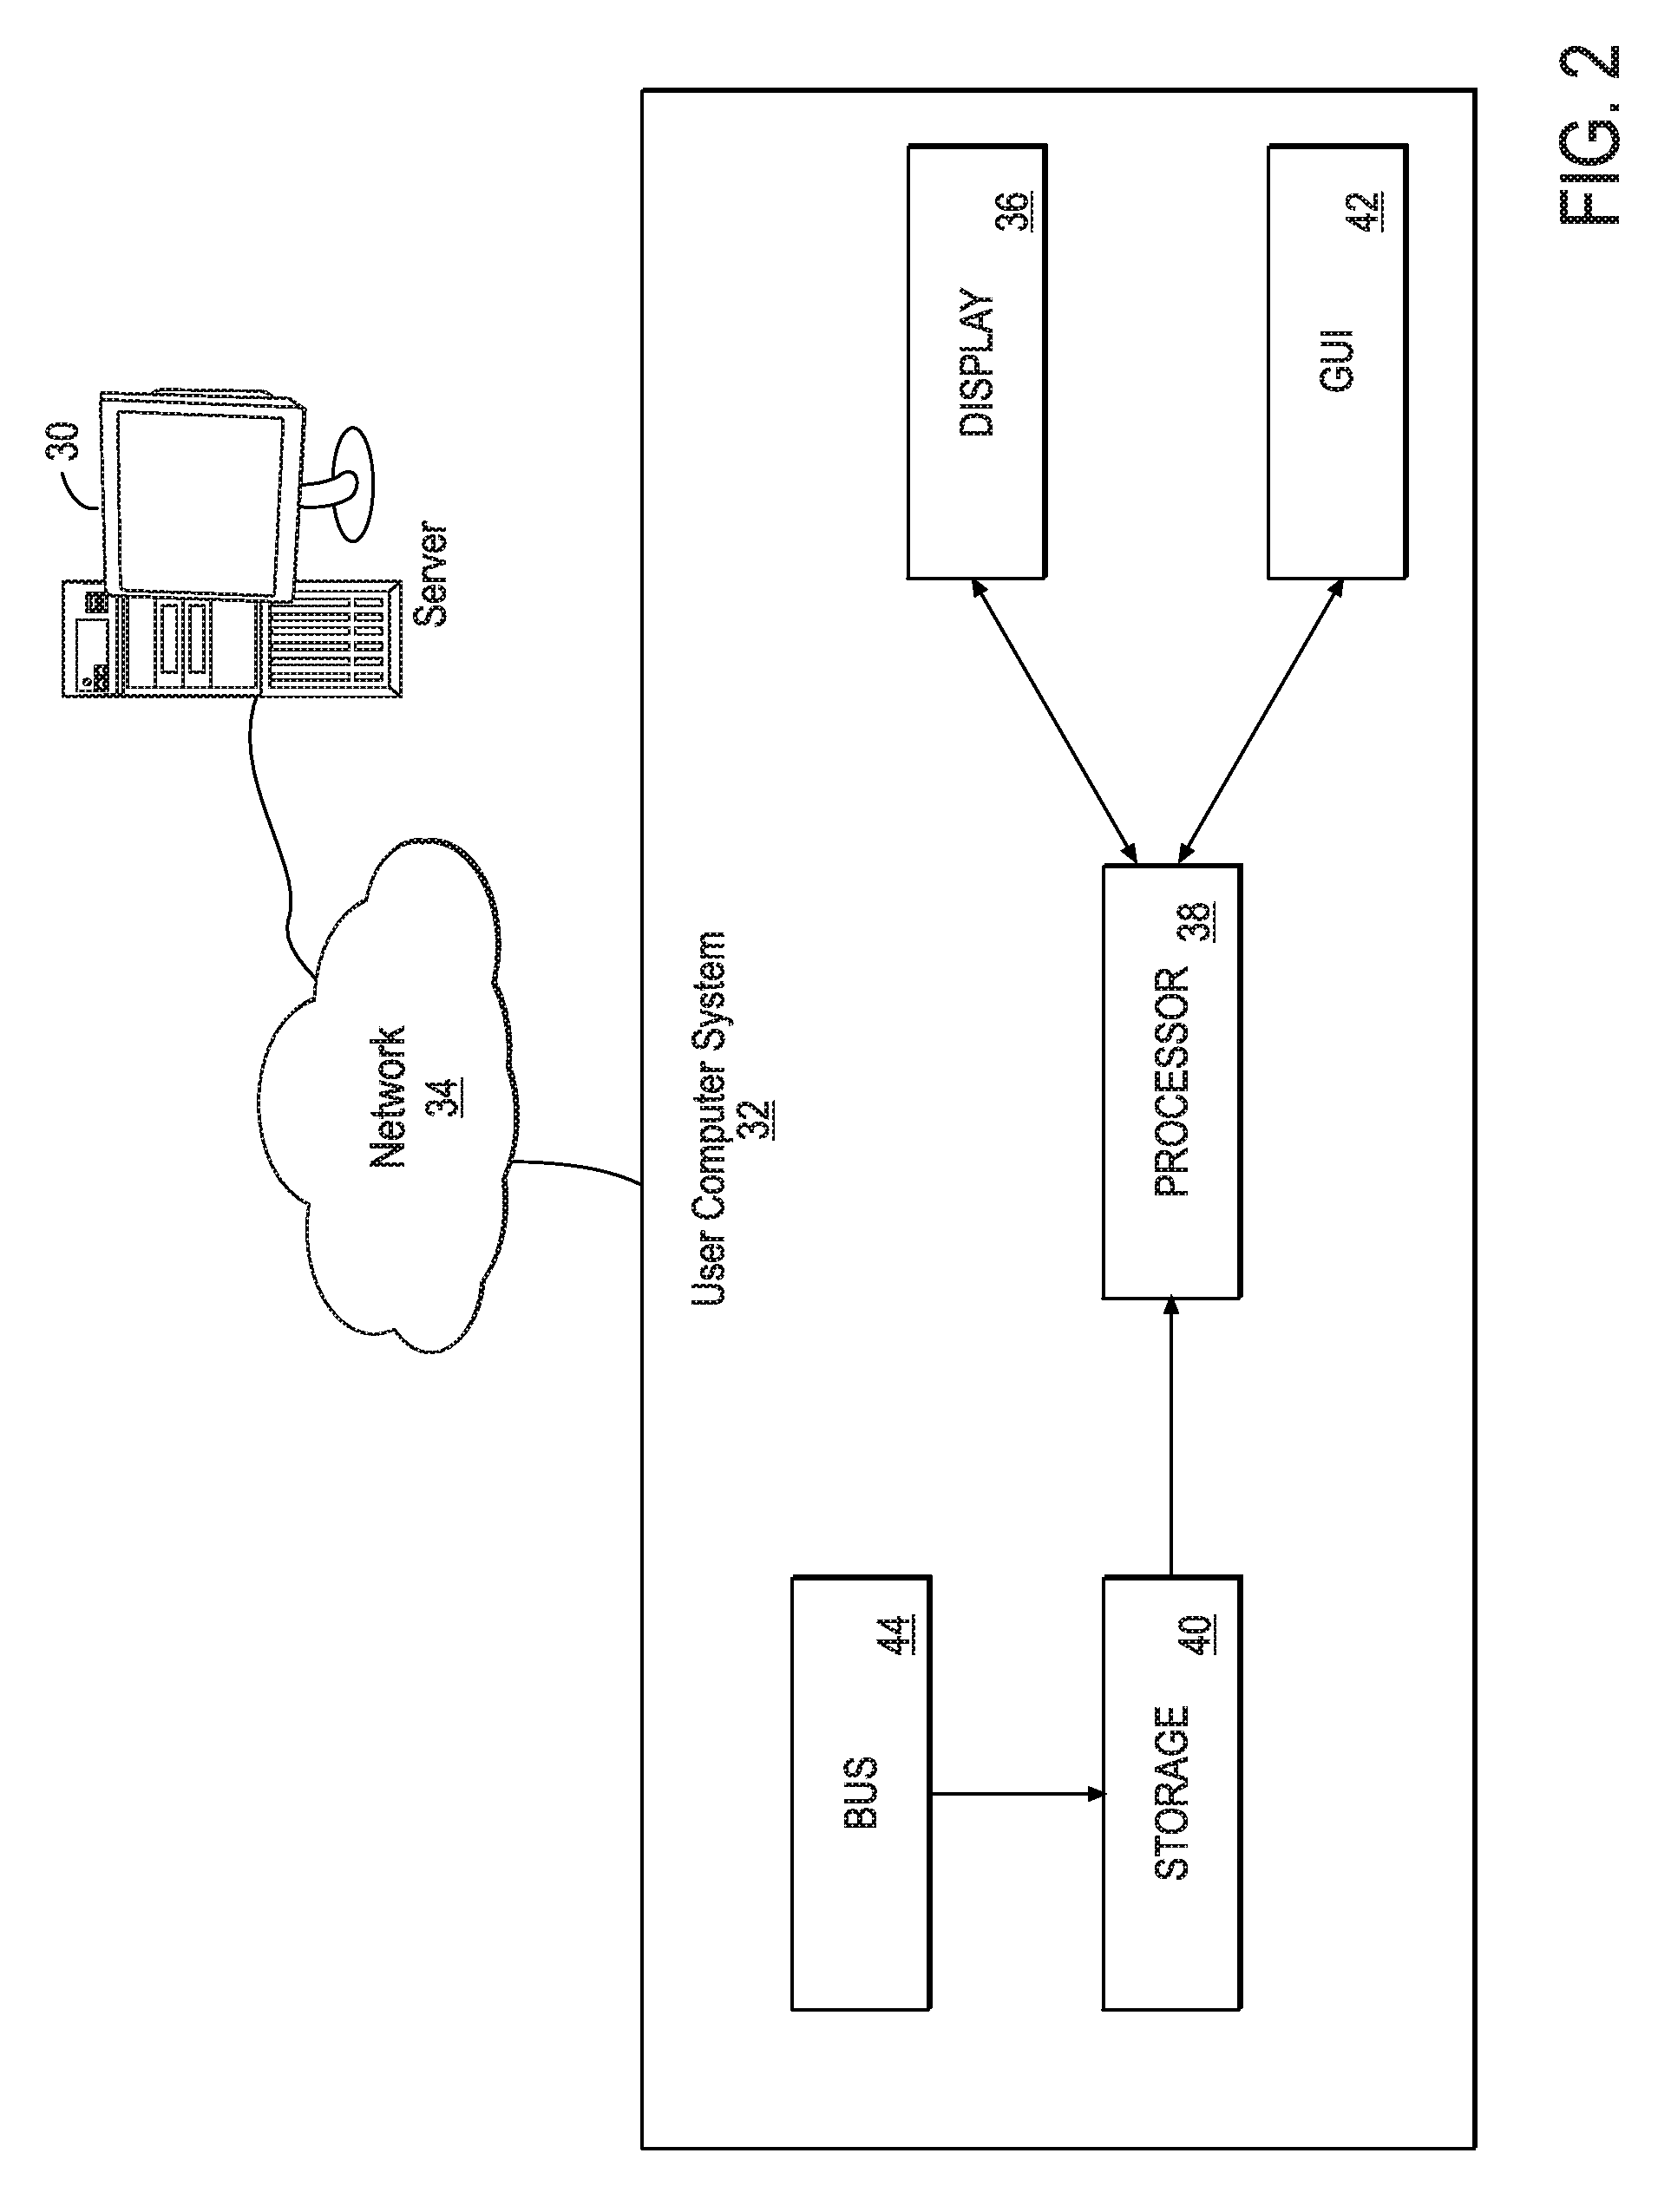 Method and system for conducting geologic basin analysis